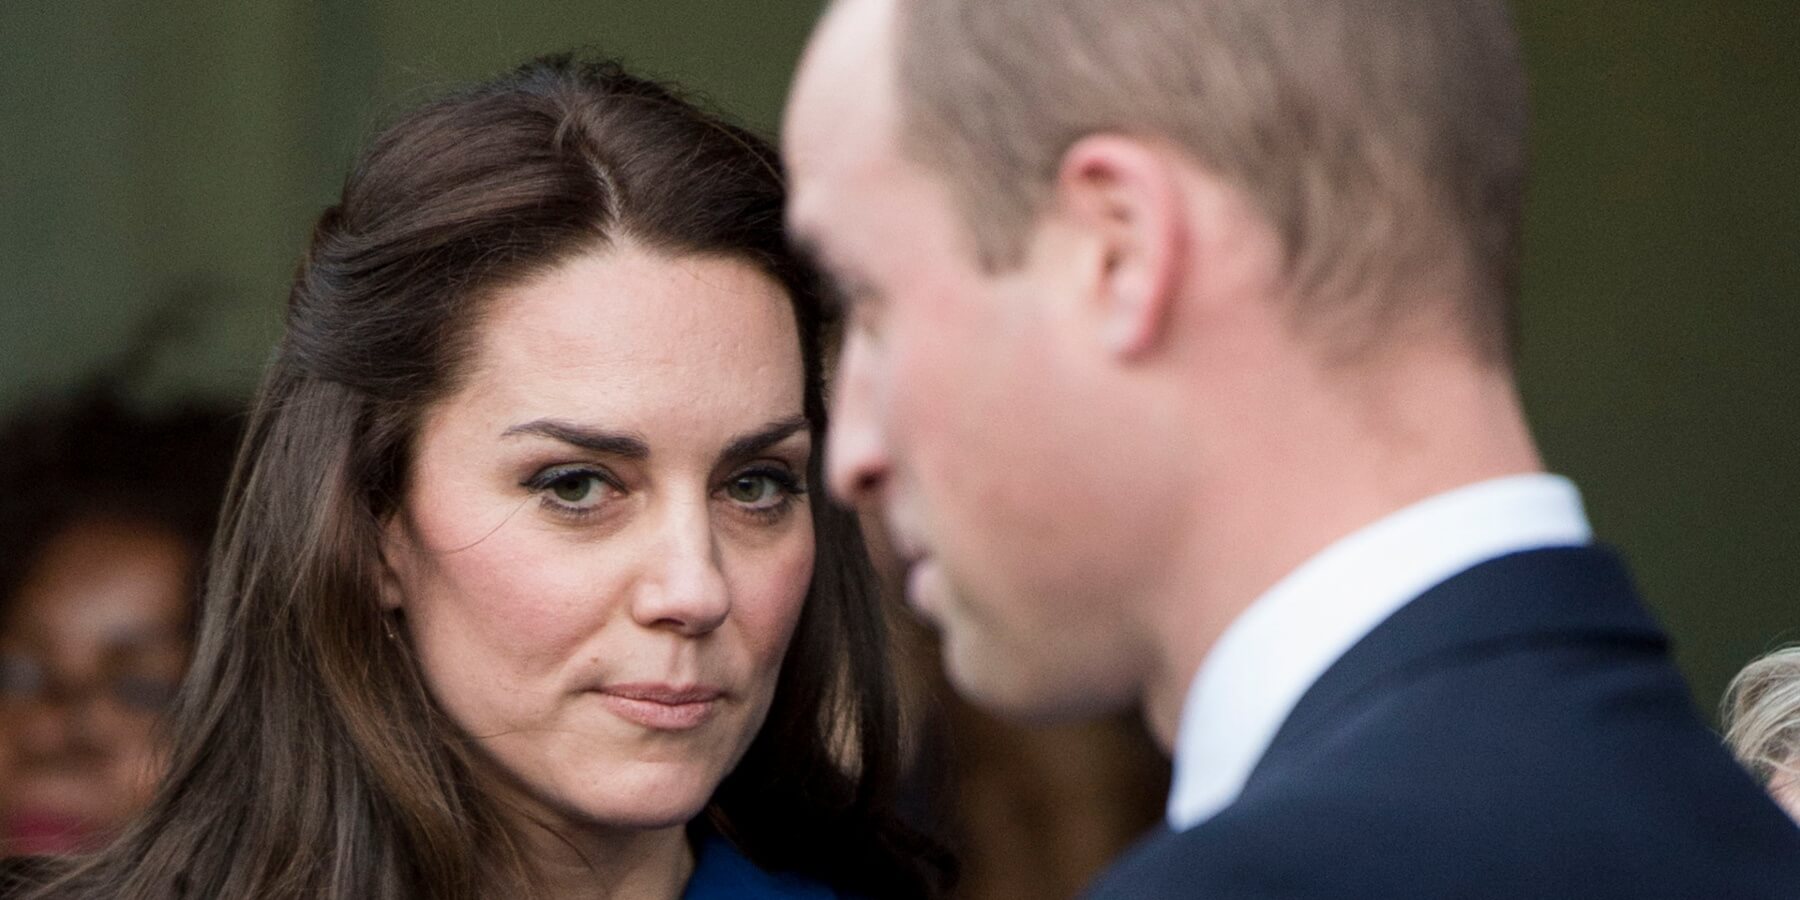 Kate Middleton and Prince William's designer pal are 'going through hell'